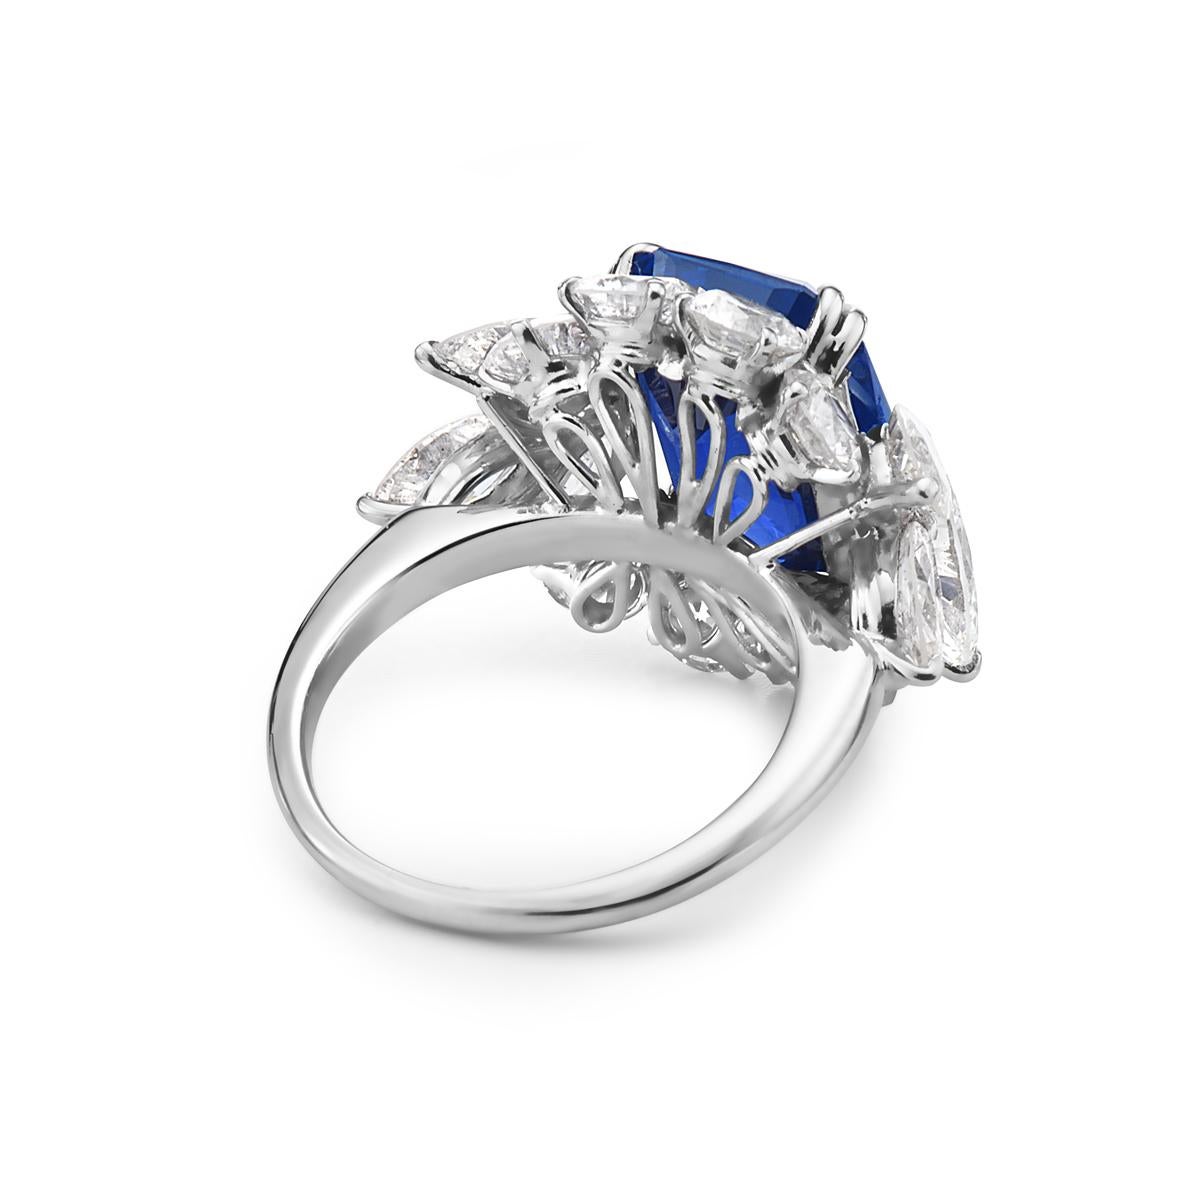 Women's 10.73 Carat Royal Blue Sapphire and Diamond Cocktail Ring